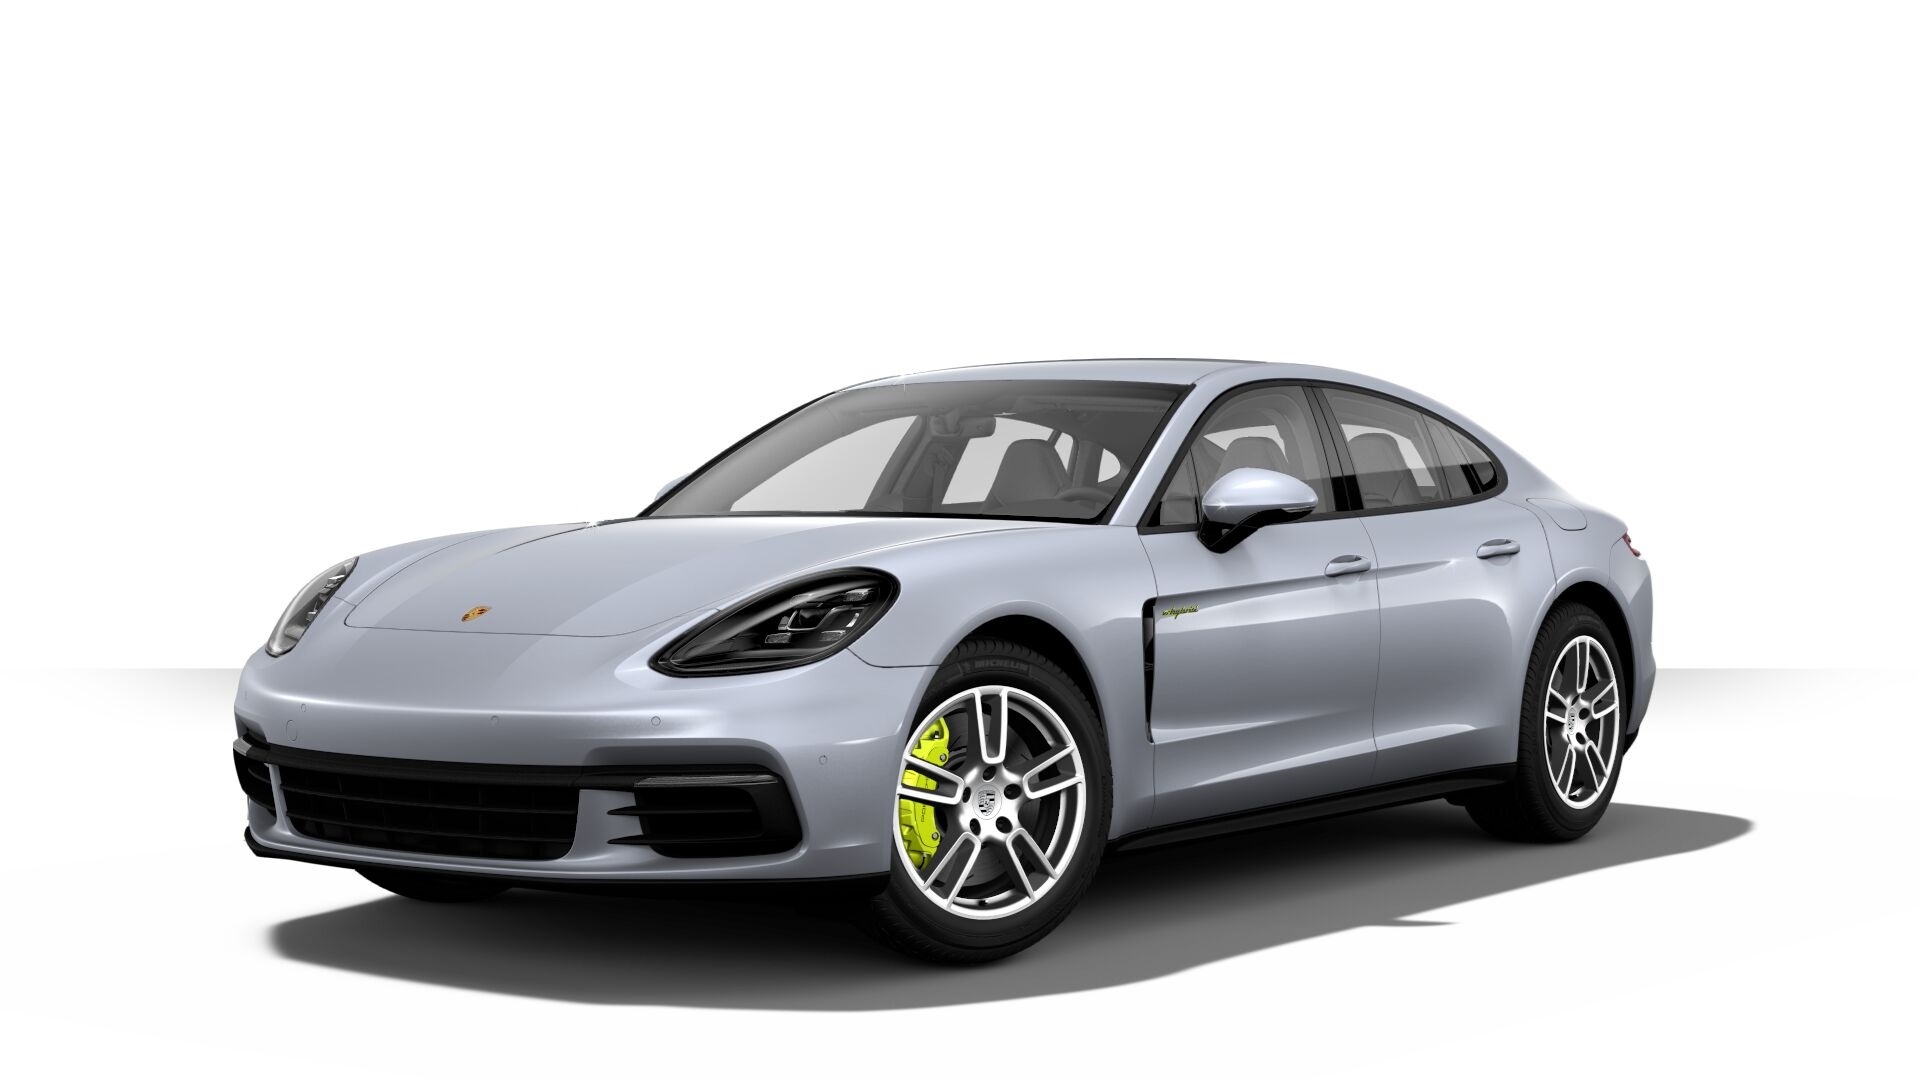 2020 Porsche Panamera Turbo S E-Hybrid Full Specs, Features and Price |  CarBuzz